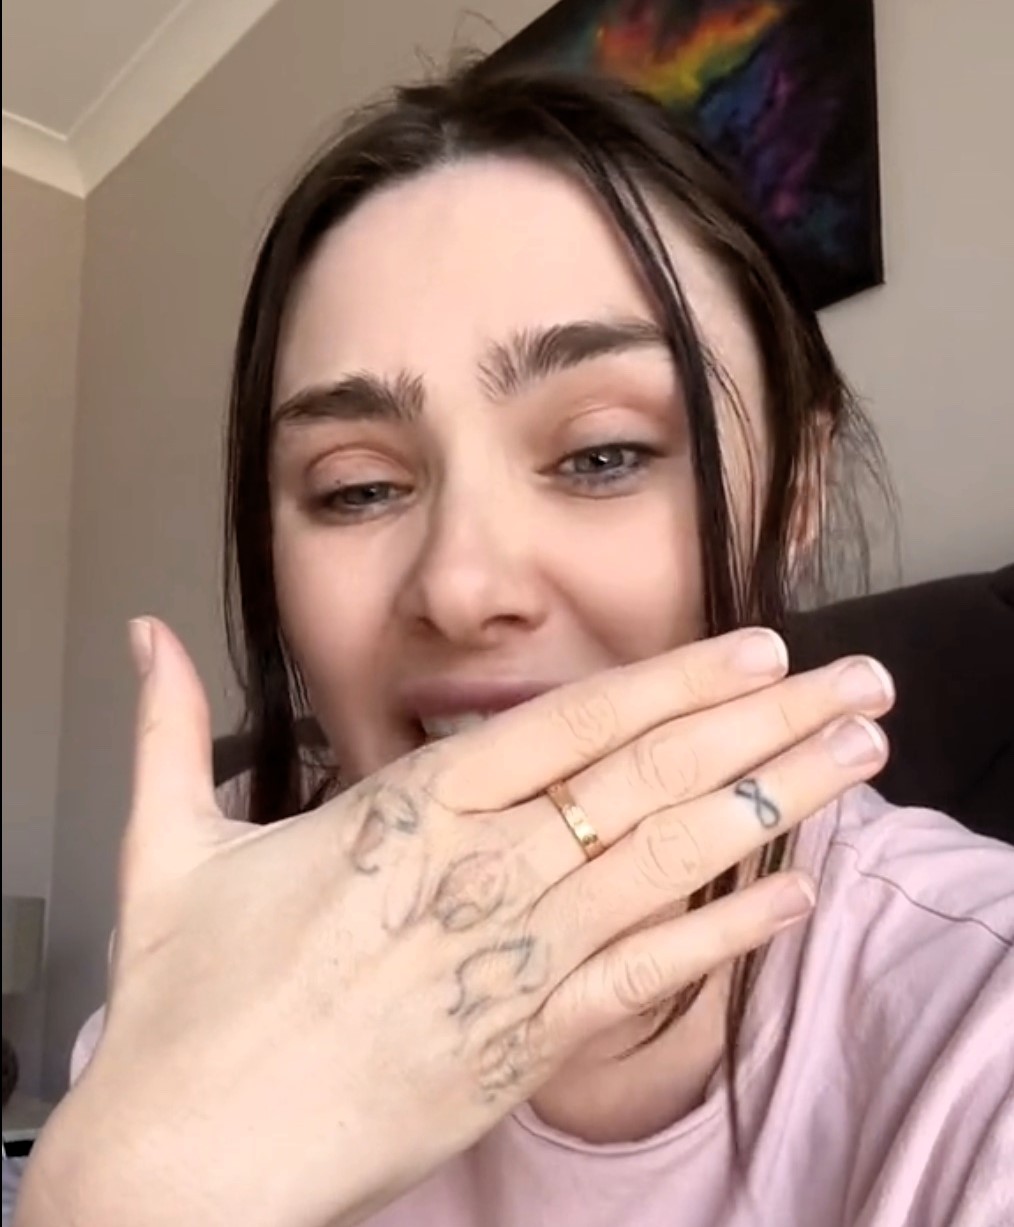 Video grab of Lauren explaining why she regrets getting tattoo’s.